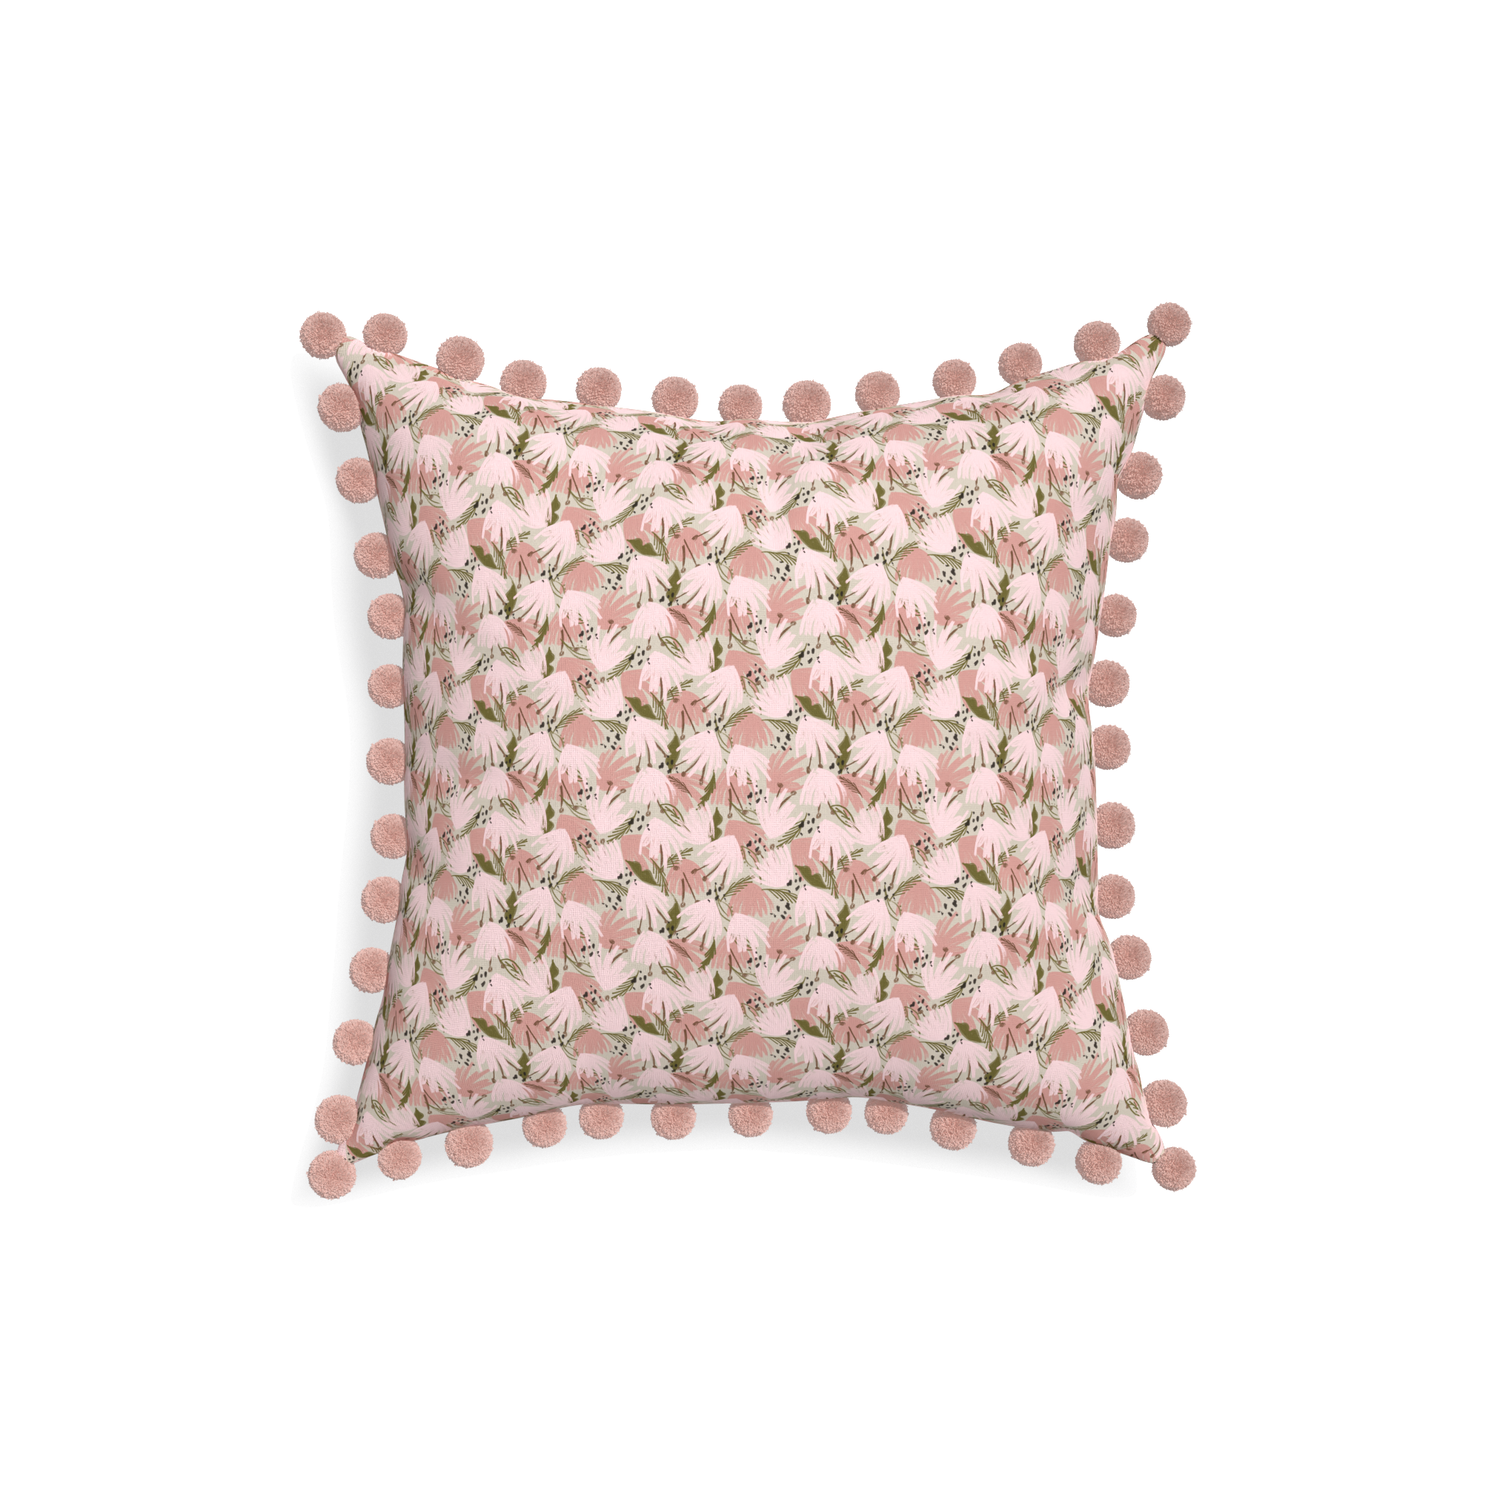 18-square eden pink custom pink floralpillow with rose pom pom on white background